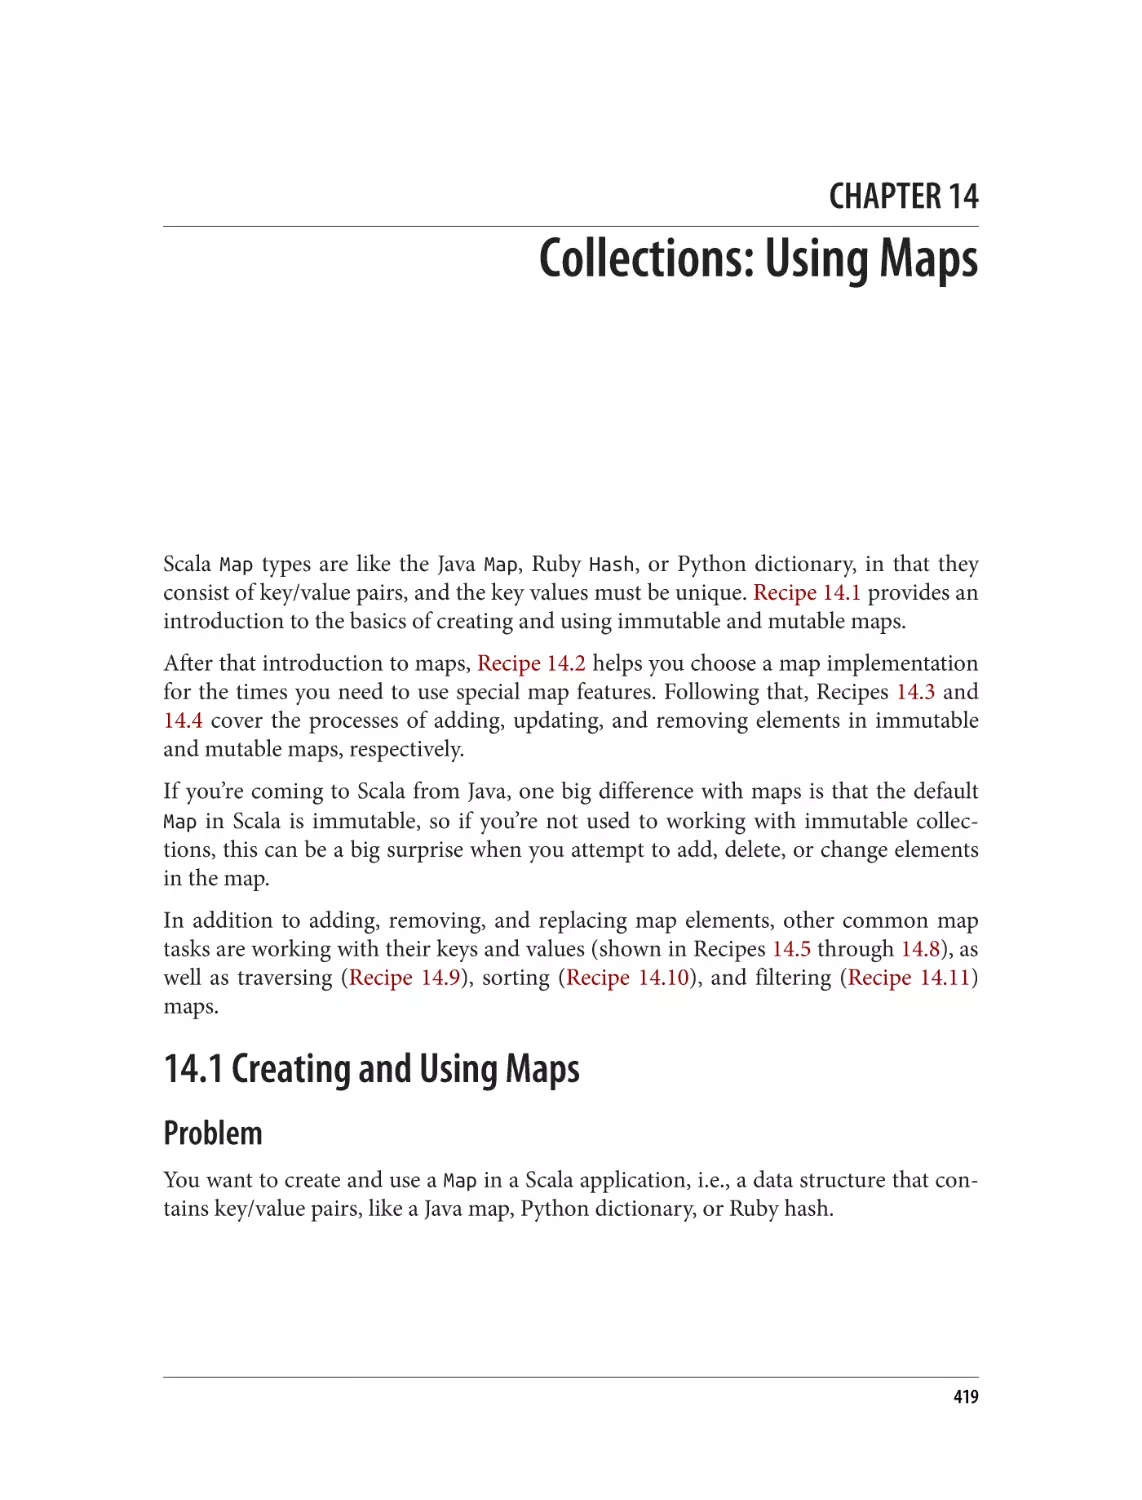 Chapter 14. Collections
14.1 Creating and Using Maps
Problem